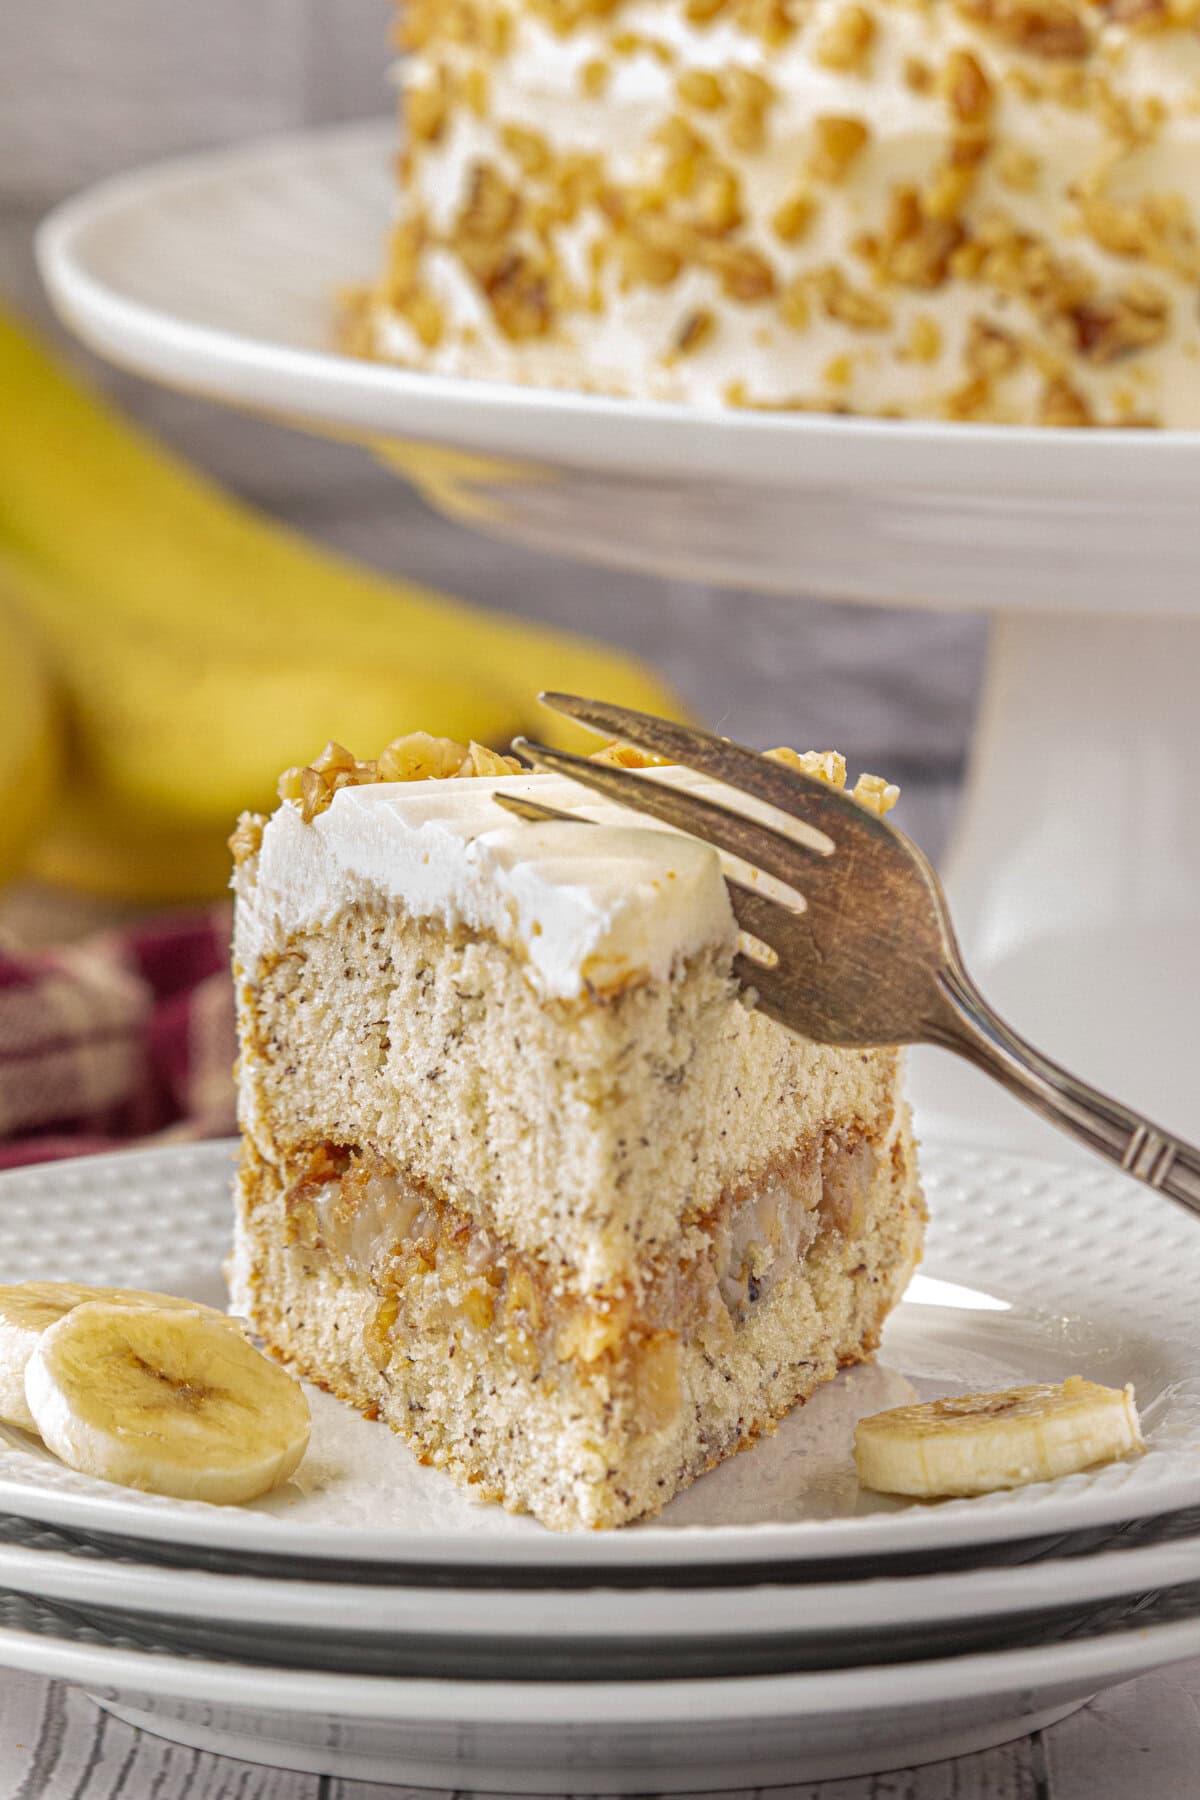 A slice of banana layer cake with walnut filling.